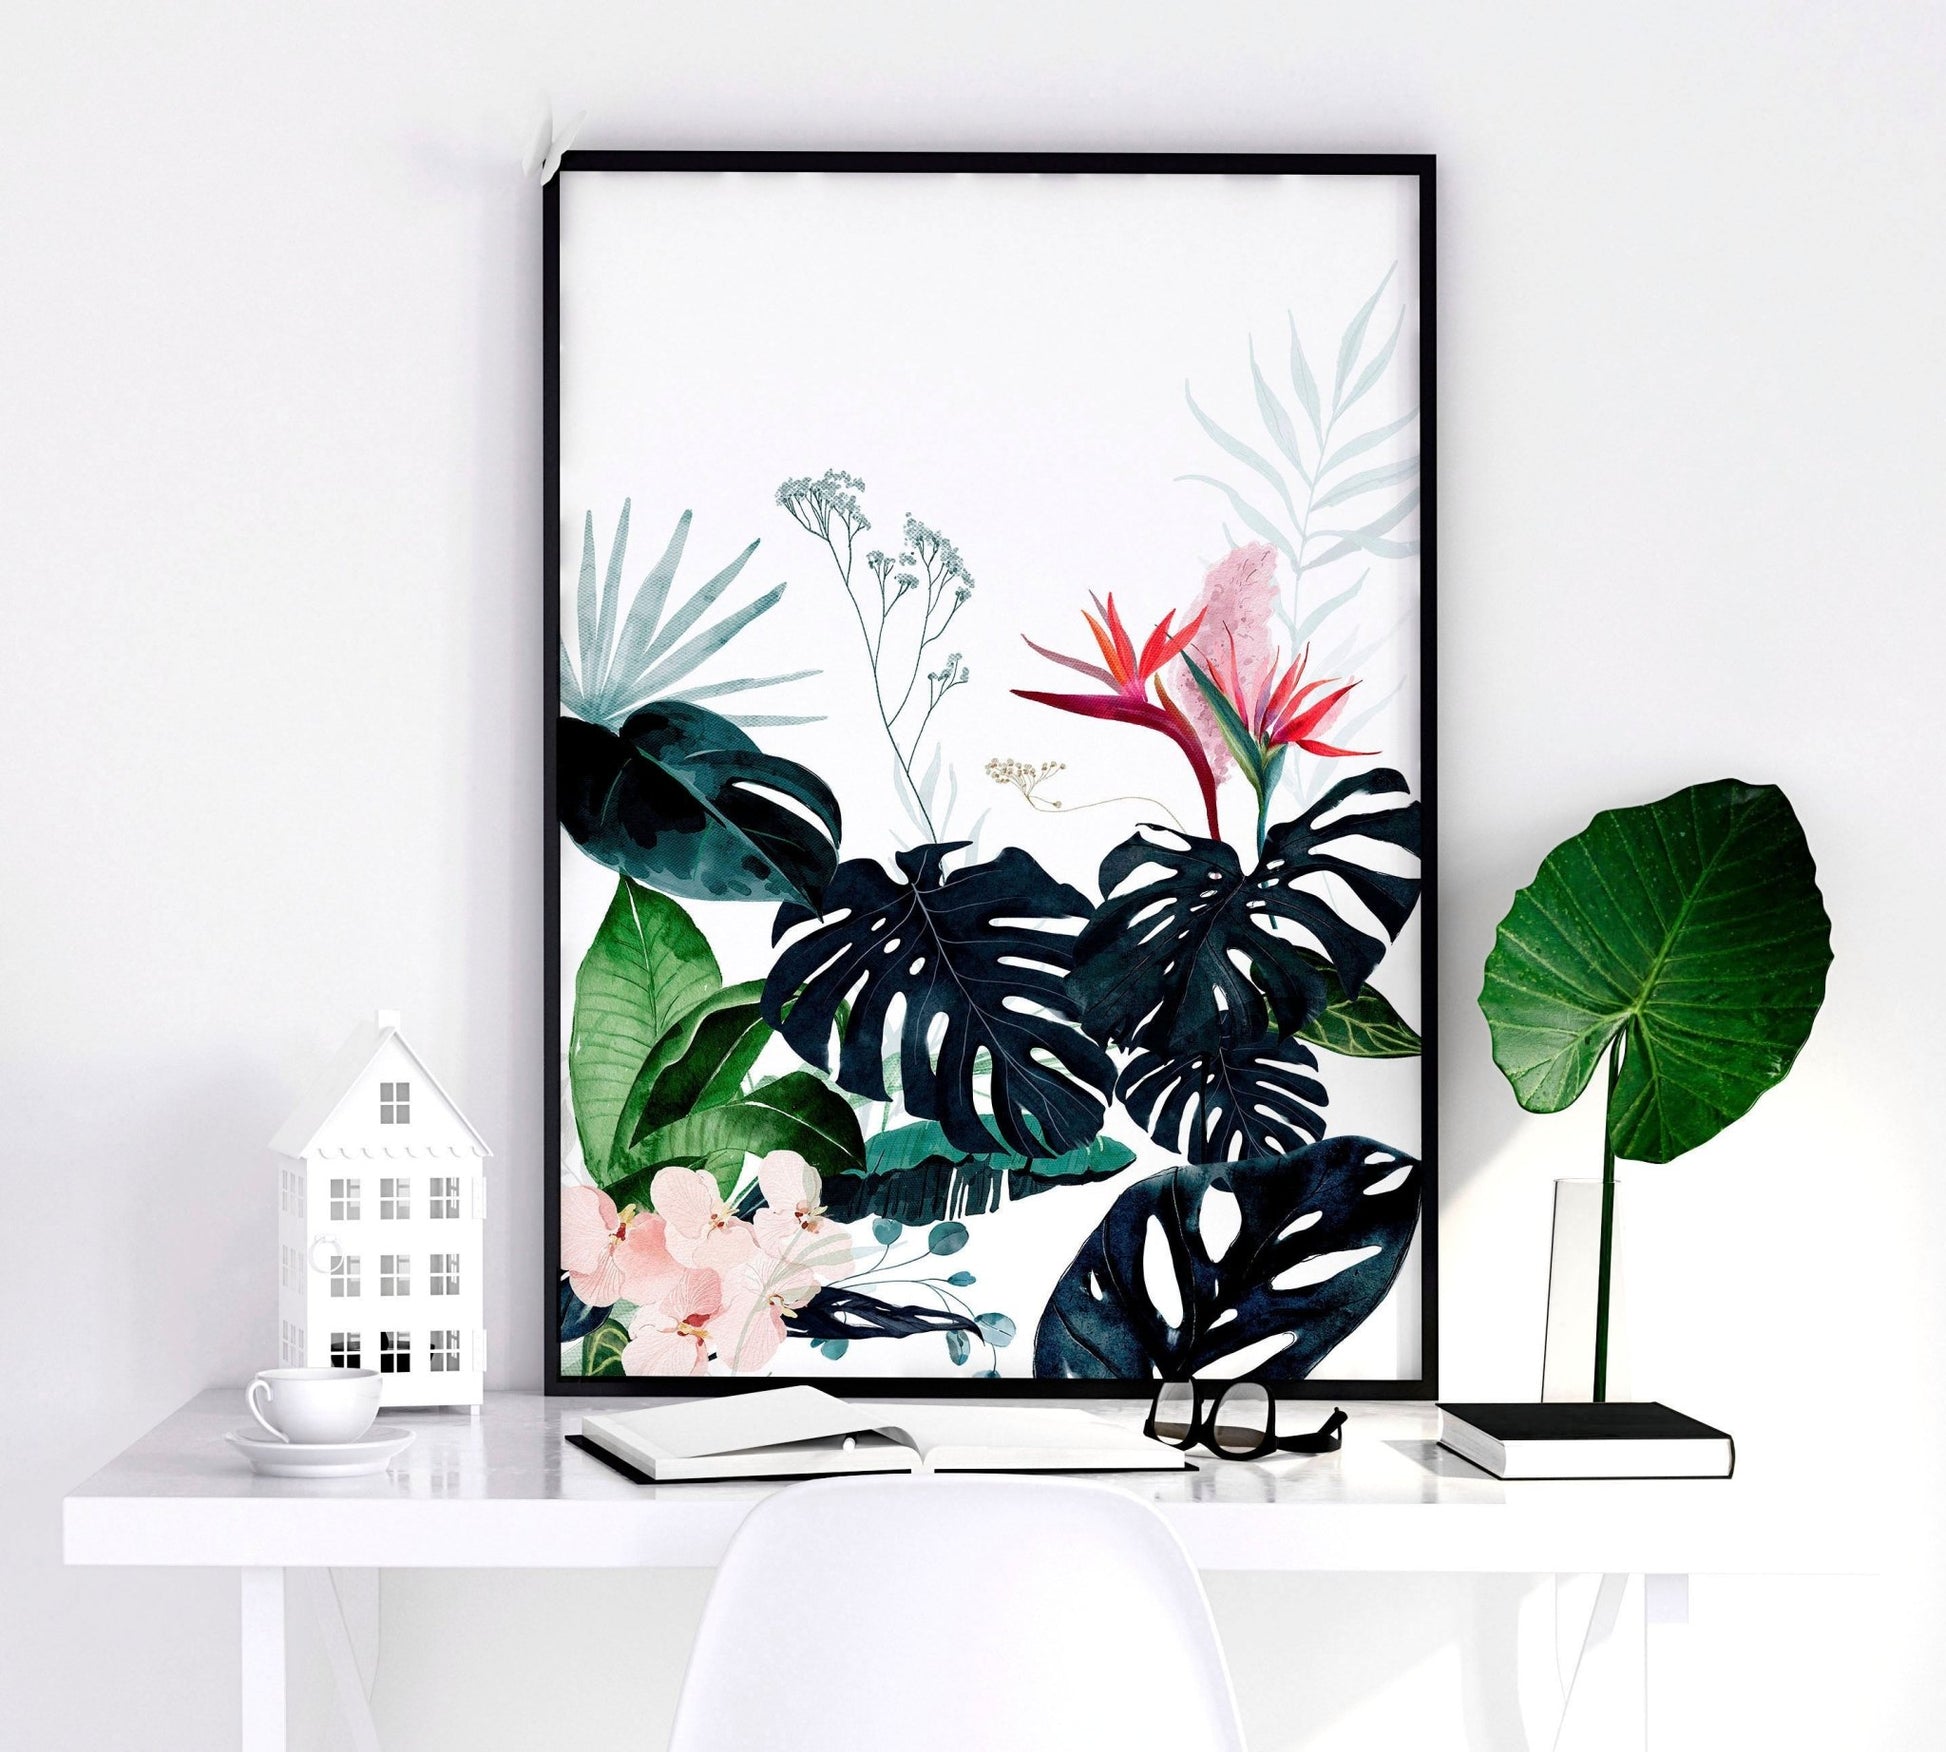 Artwork for offices | set of 3 Tropical wall art